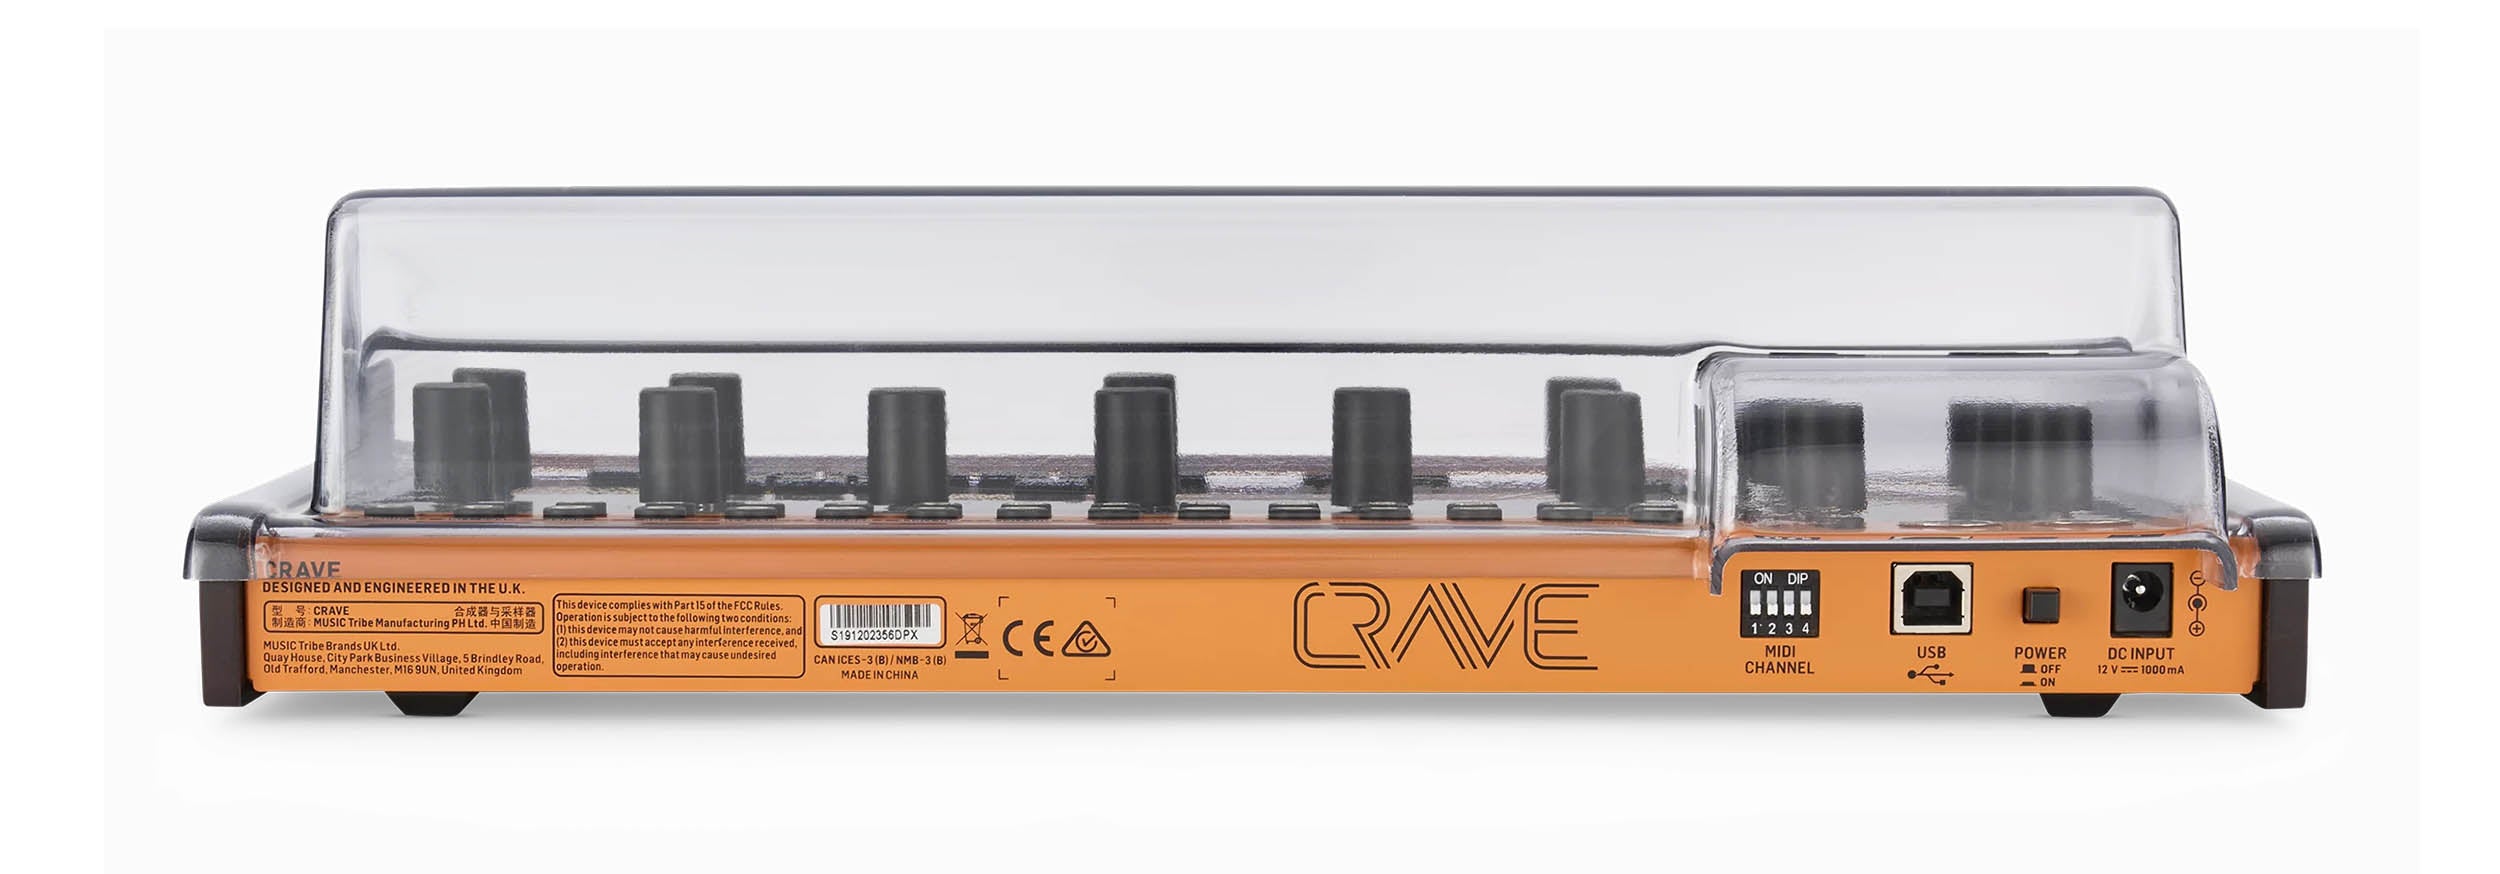 Decksaver DS-PC-EDGECRAVE, Protection Cover for Behringer CRAVE & EDGE Synthesizer by Decksaver